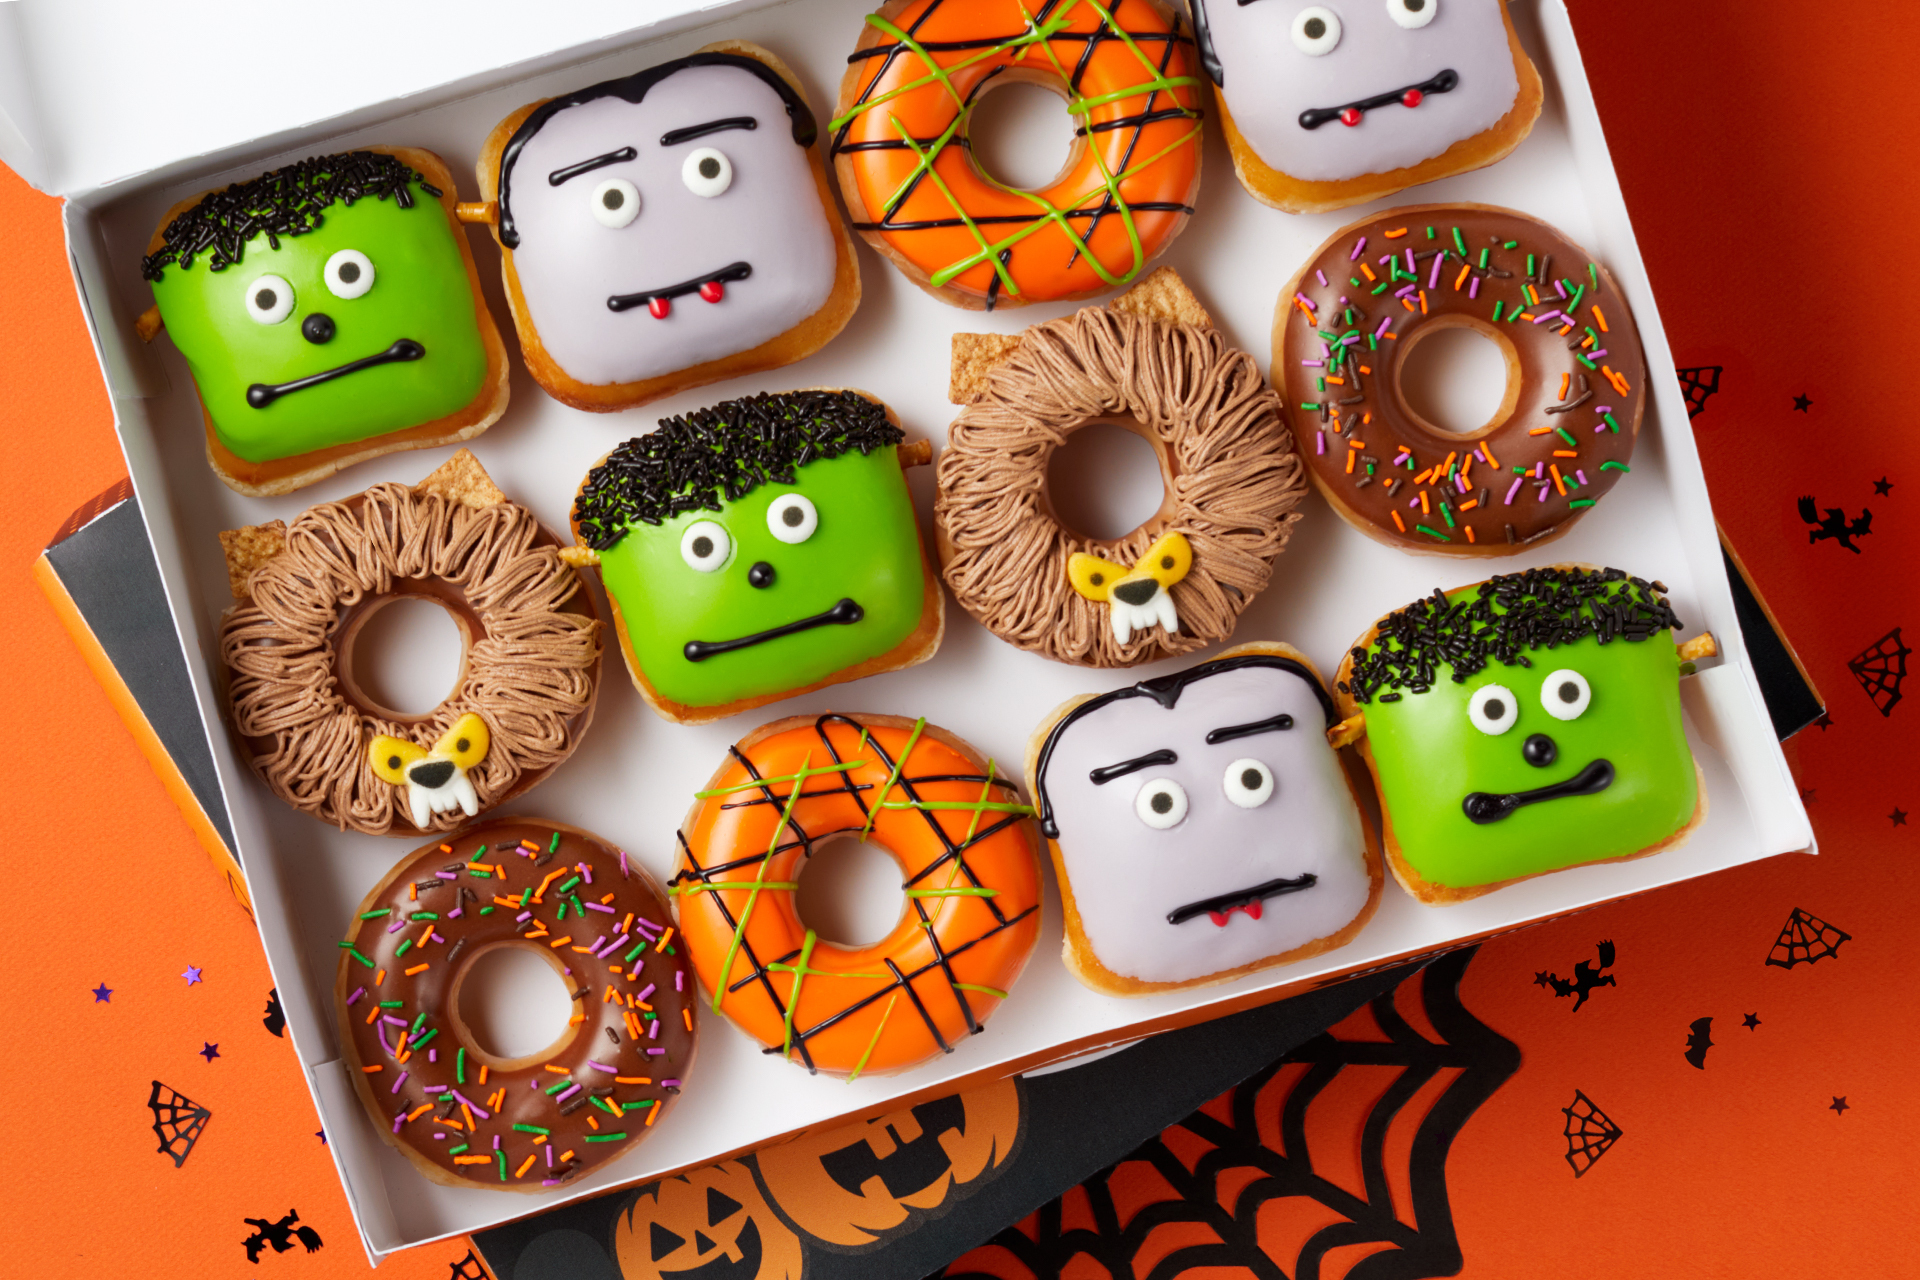 Guide: Deals for a scary delicious Halloween